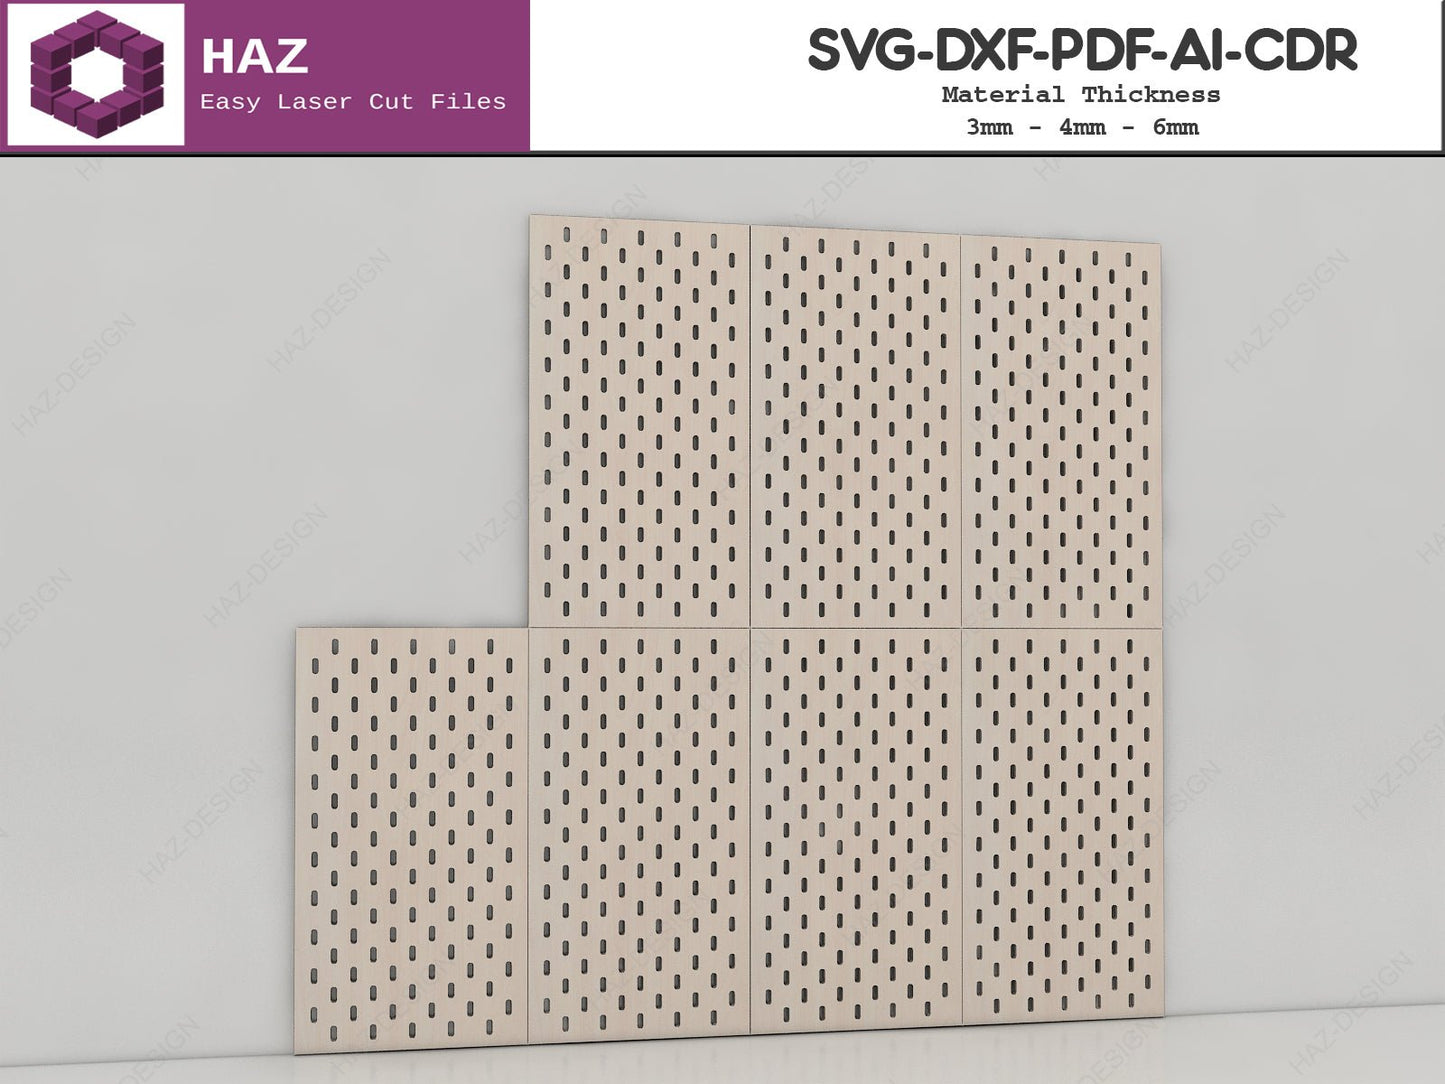 Hanging Pegboard with Hooks / Peg Board and Compatible Accessories / Wall Organizer with Shelves SVG Ai DXF CDR 081